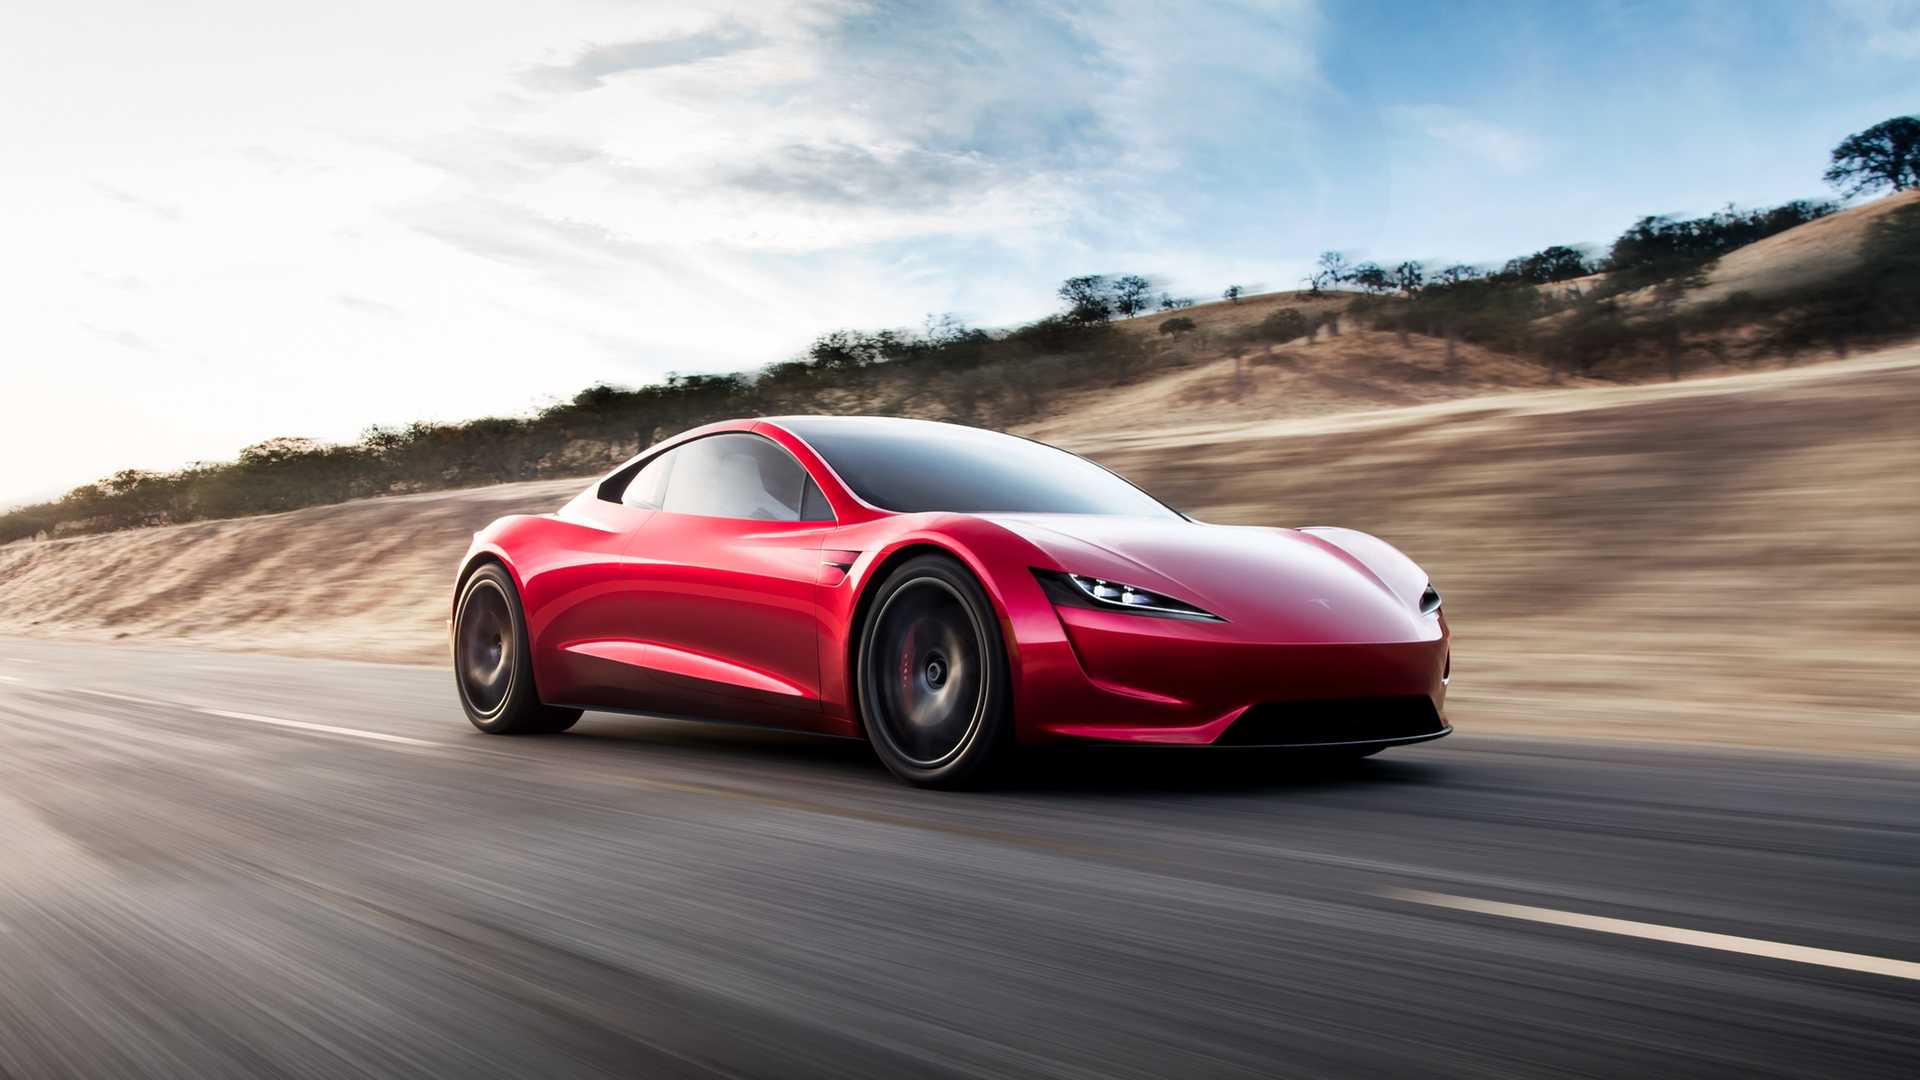 Tesla Roadster 2020 Review: Specifications, Battery